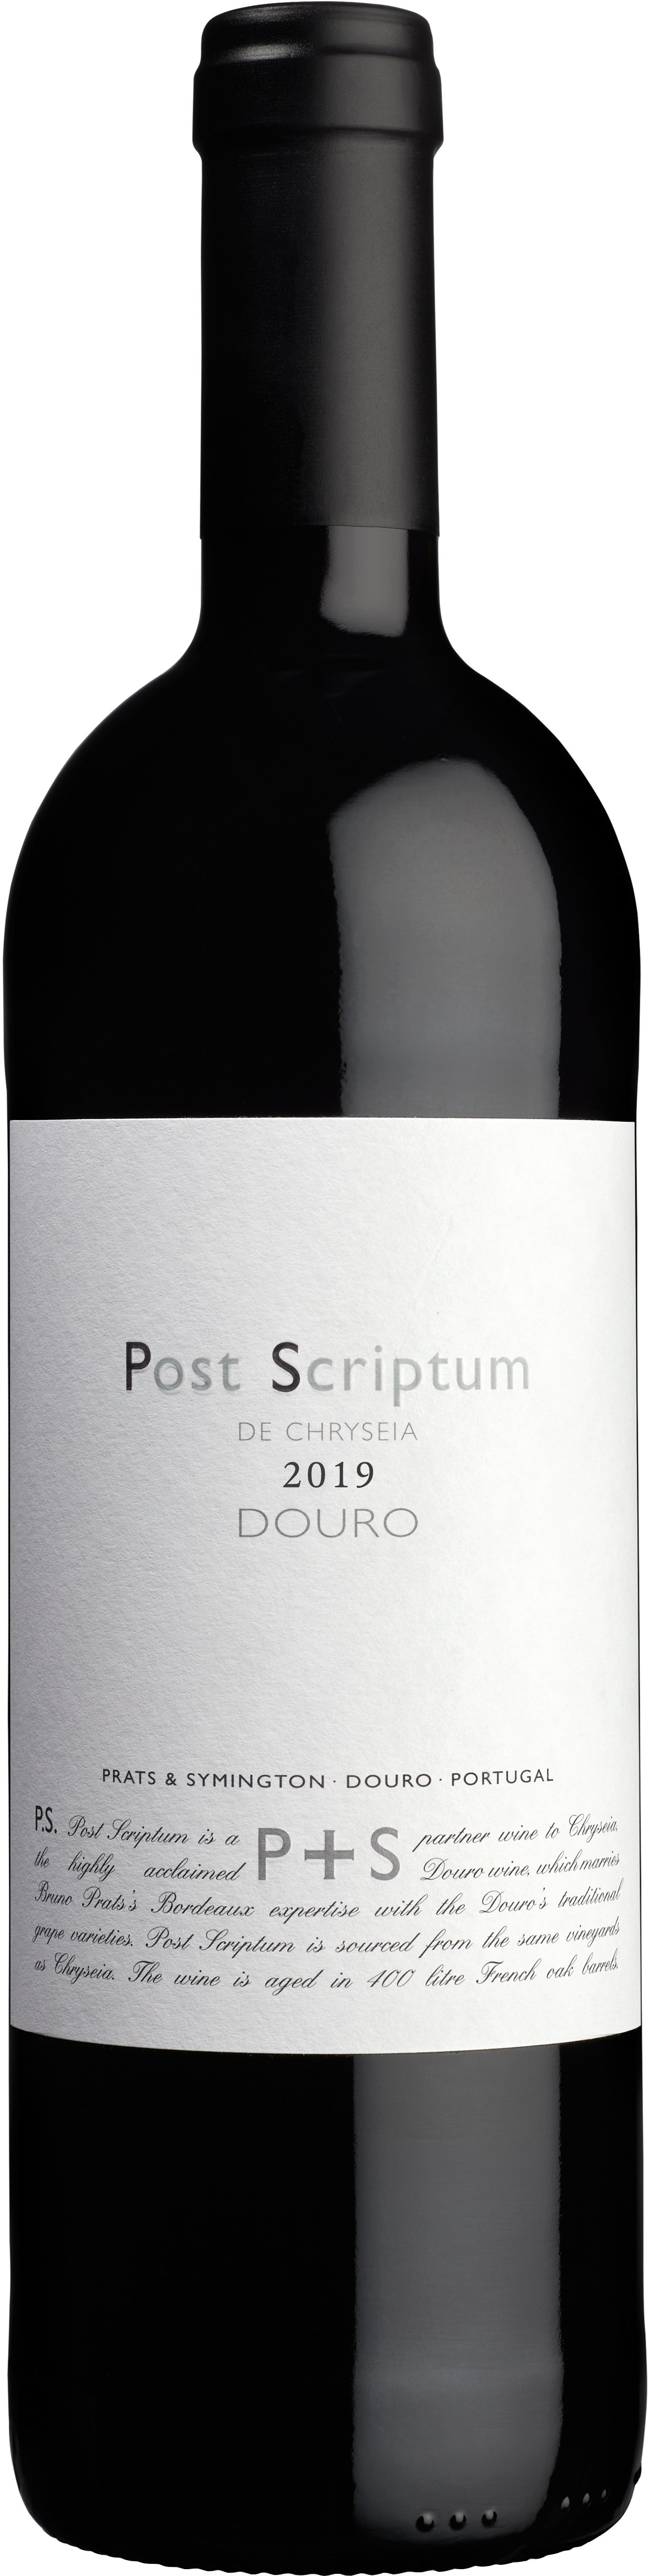 Product Image for P&S POST SCRIPTUM DE CHRYSEIA DOURO RED 2019 - 1.5L